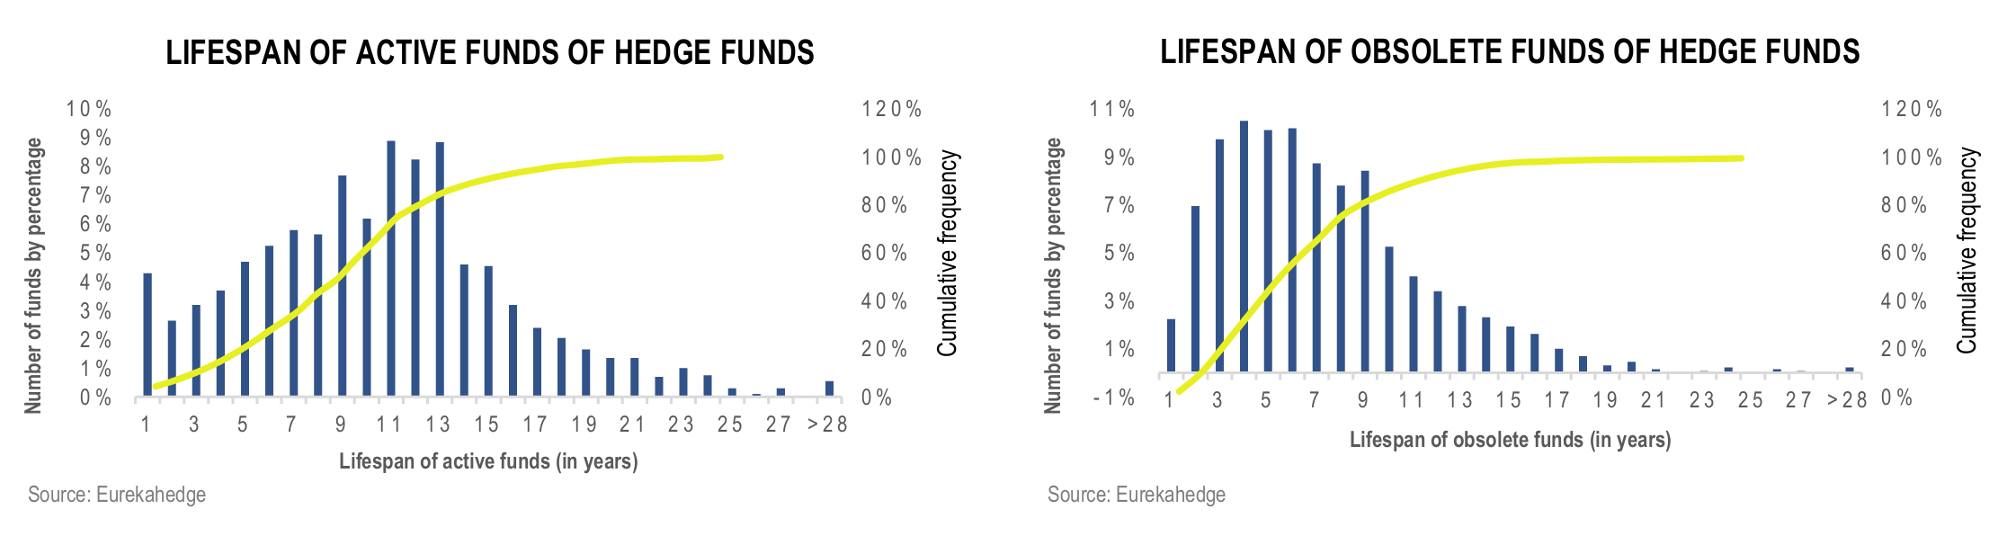 Funds of Hedge Funds Infographic May 2016 - Lifespan of active and obsolete funds